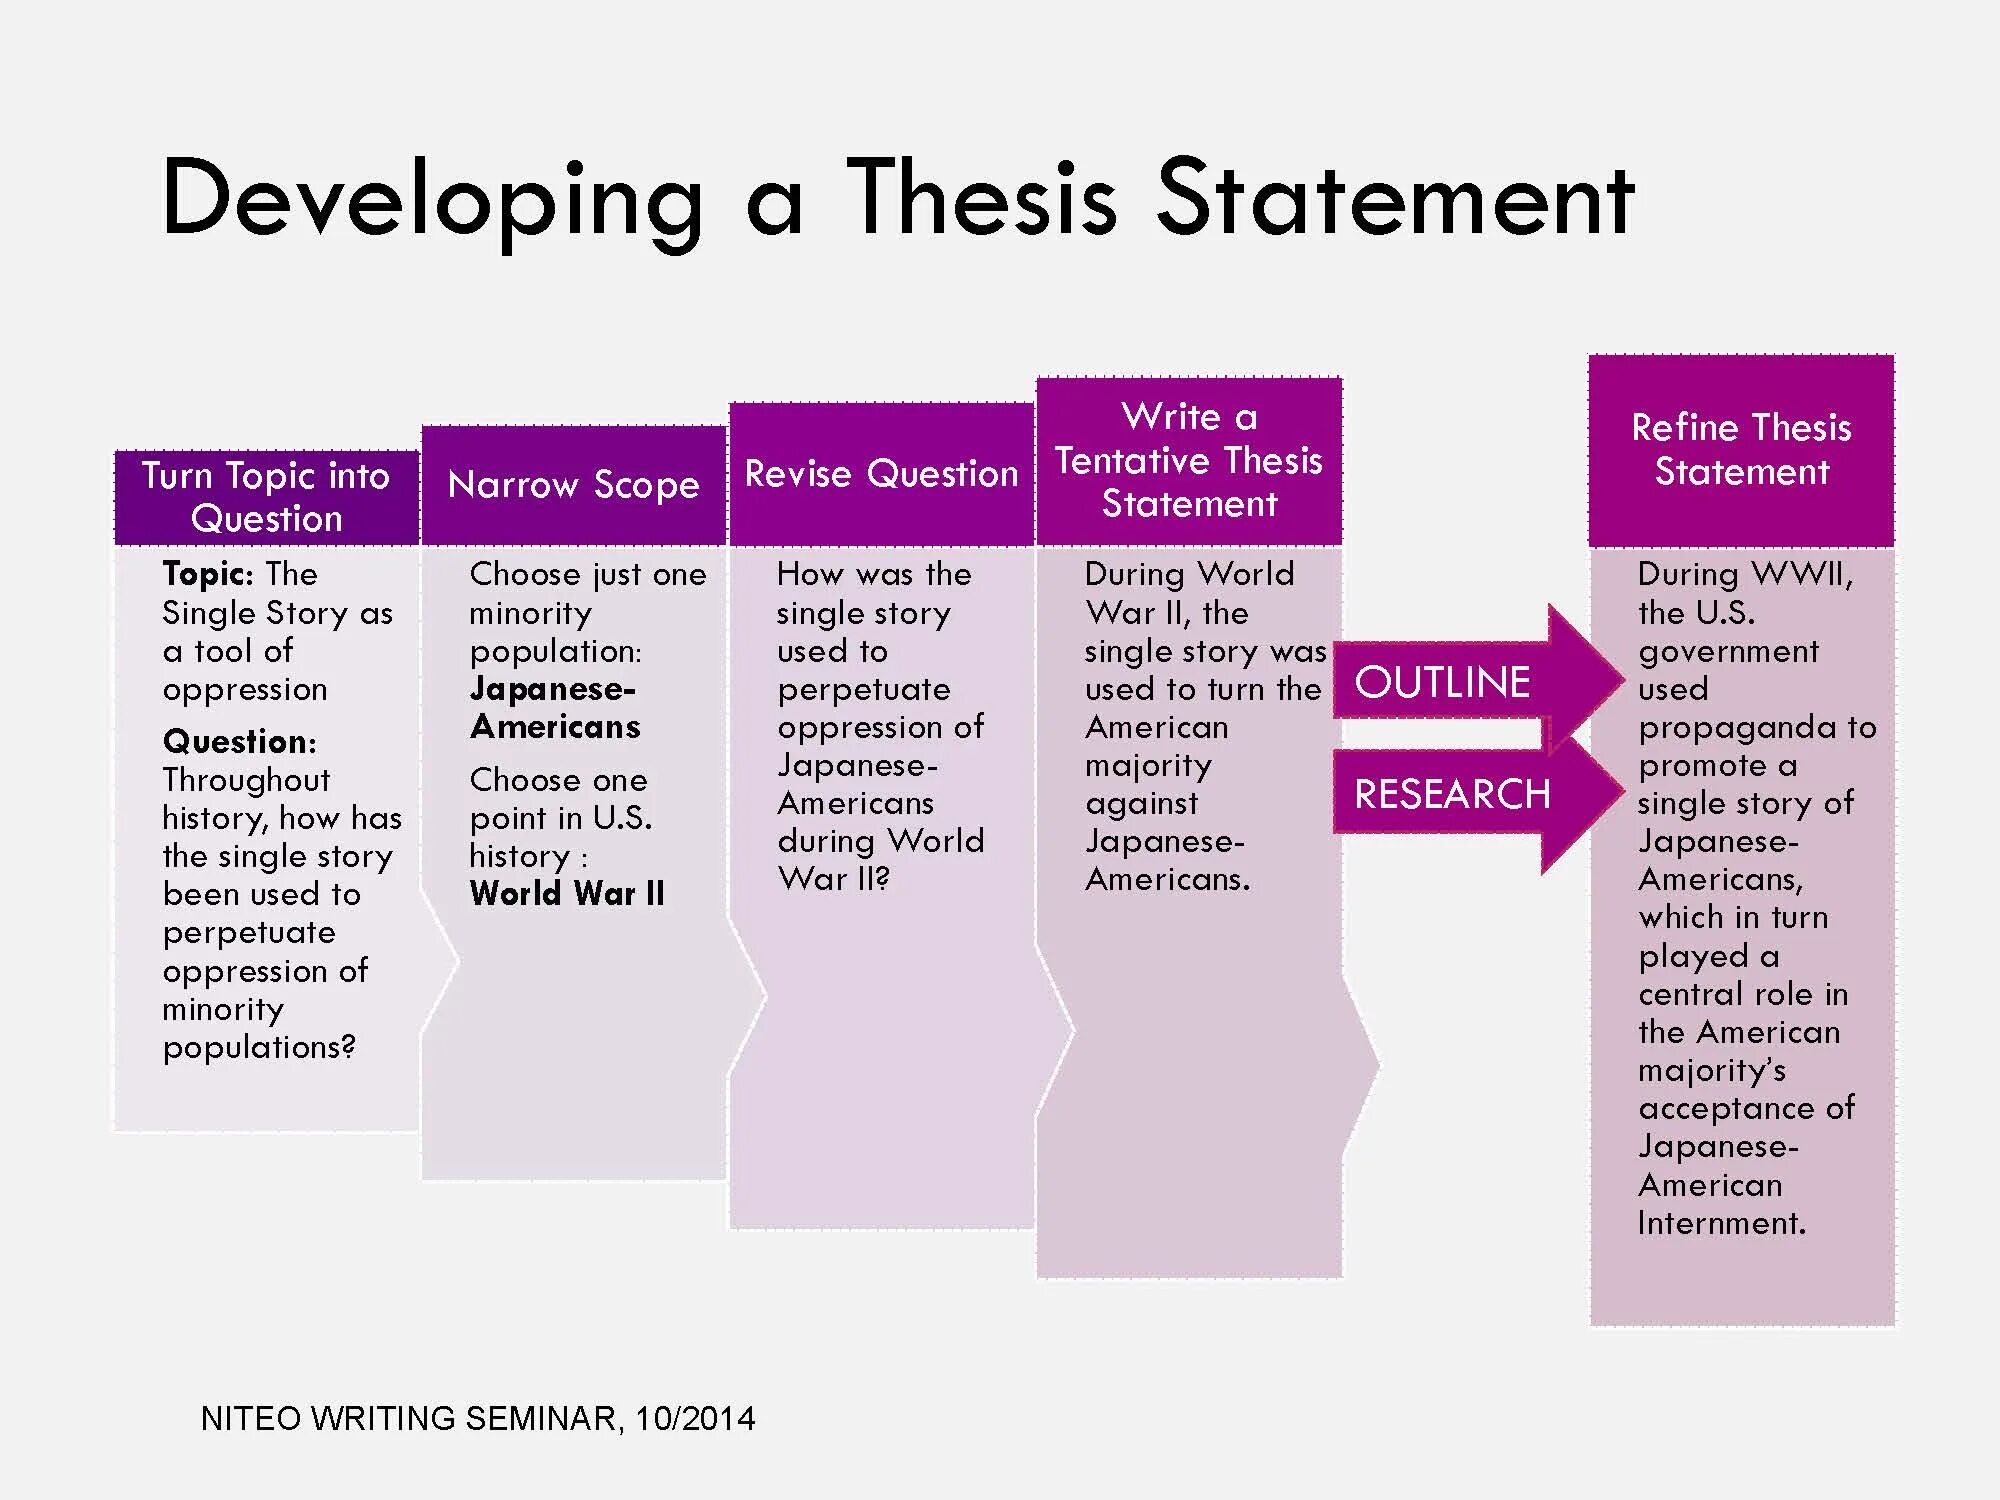 Thesis Statement. How to write a thesis Statement. What is thesis Statement. Research Statement пример.